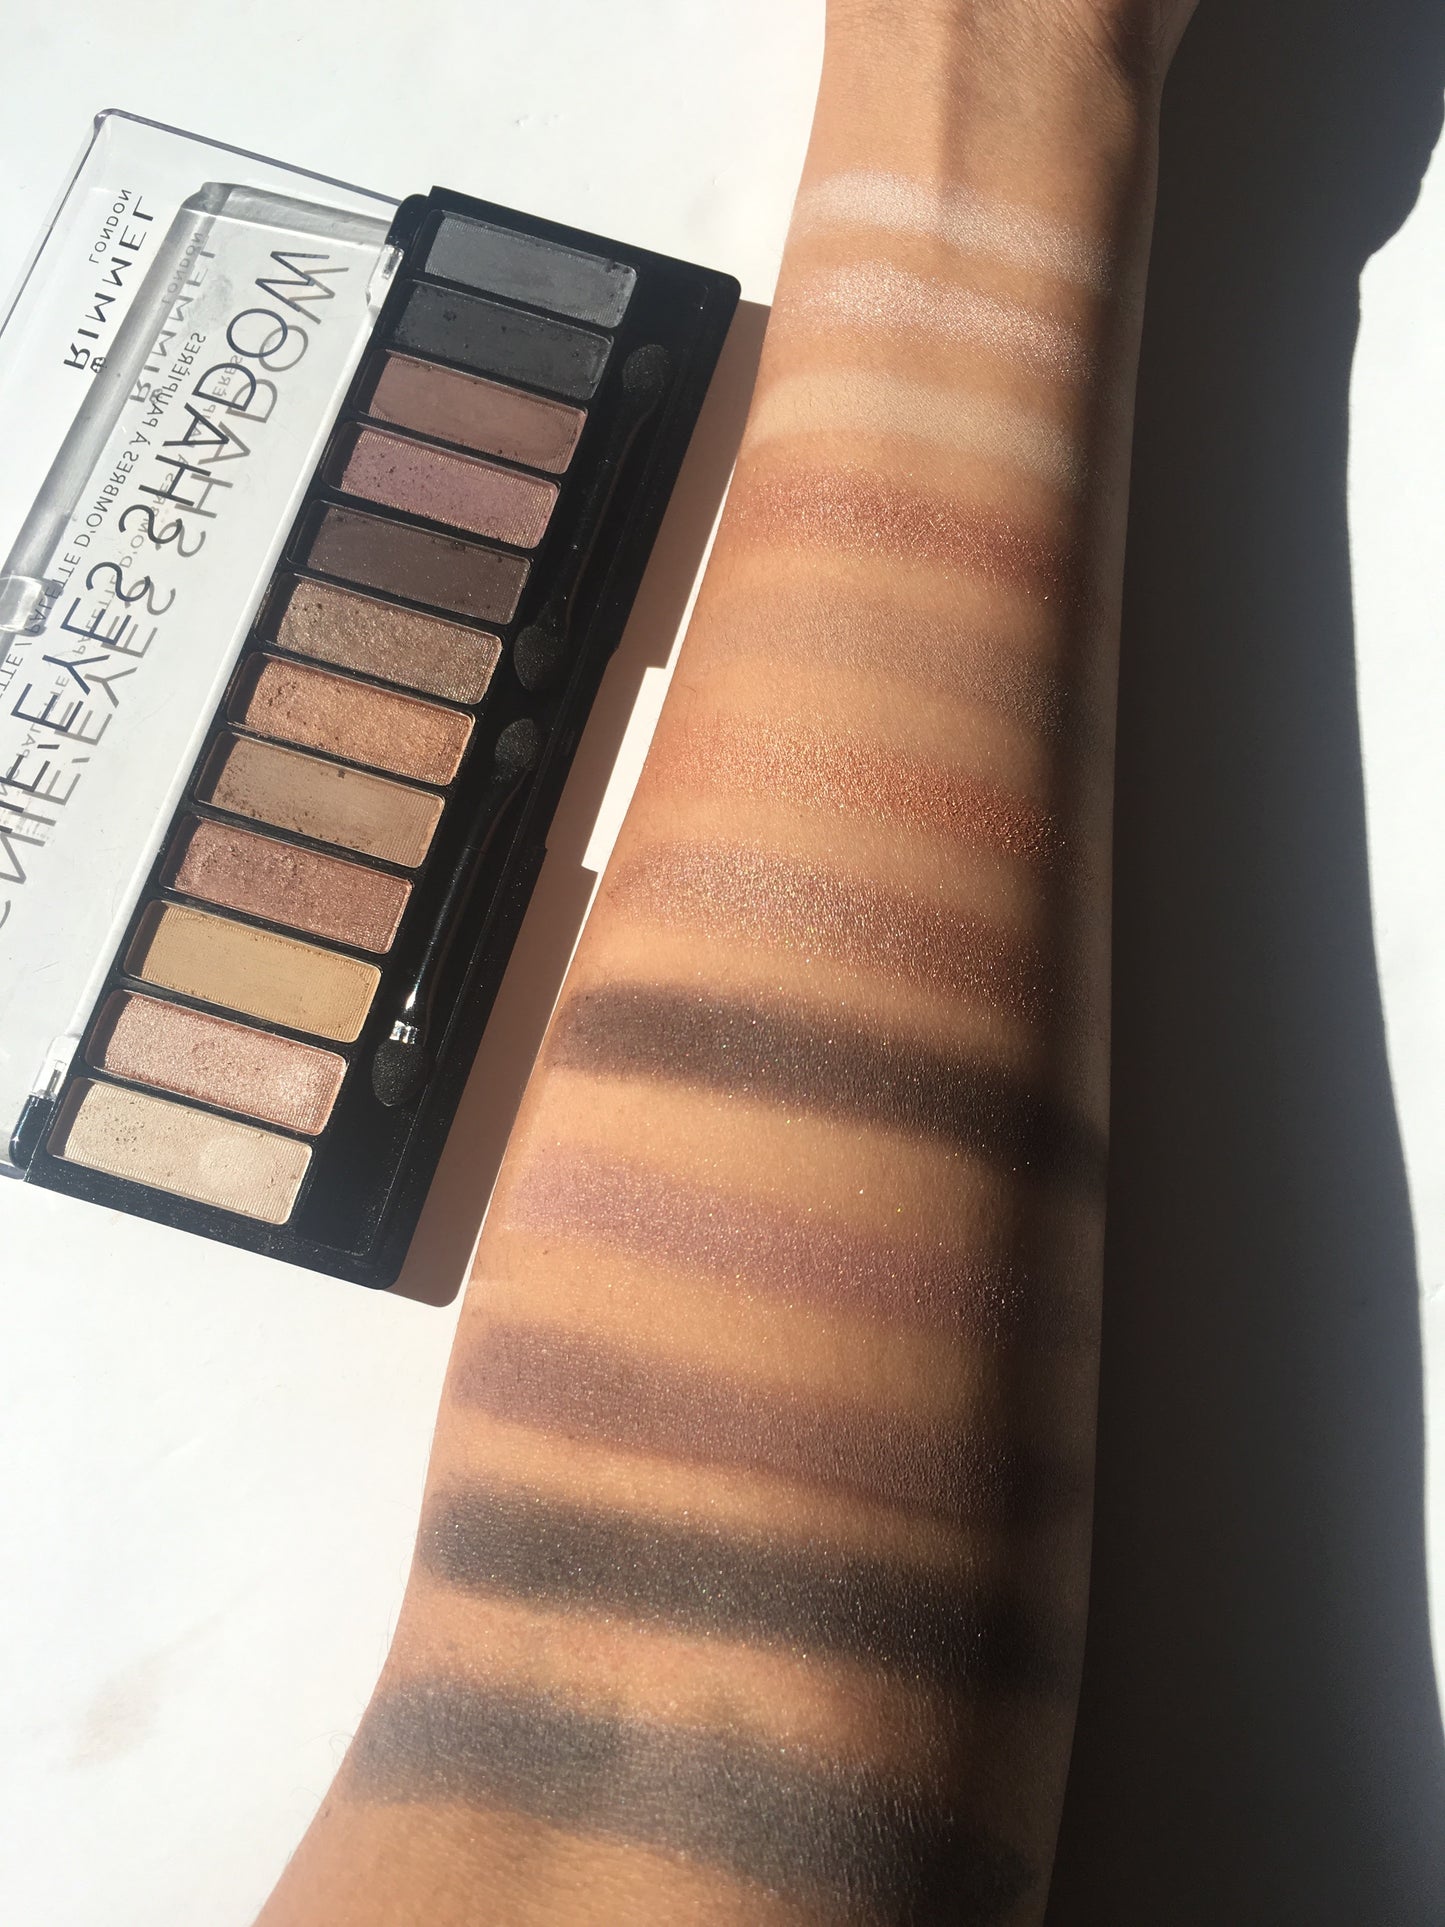 SOMBRAS MAGNIF EYES NUDE EDITION - RIMMEL LONDON